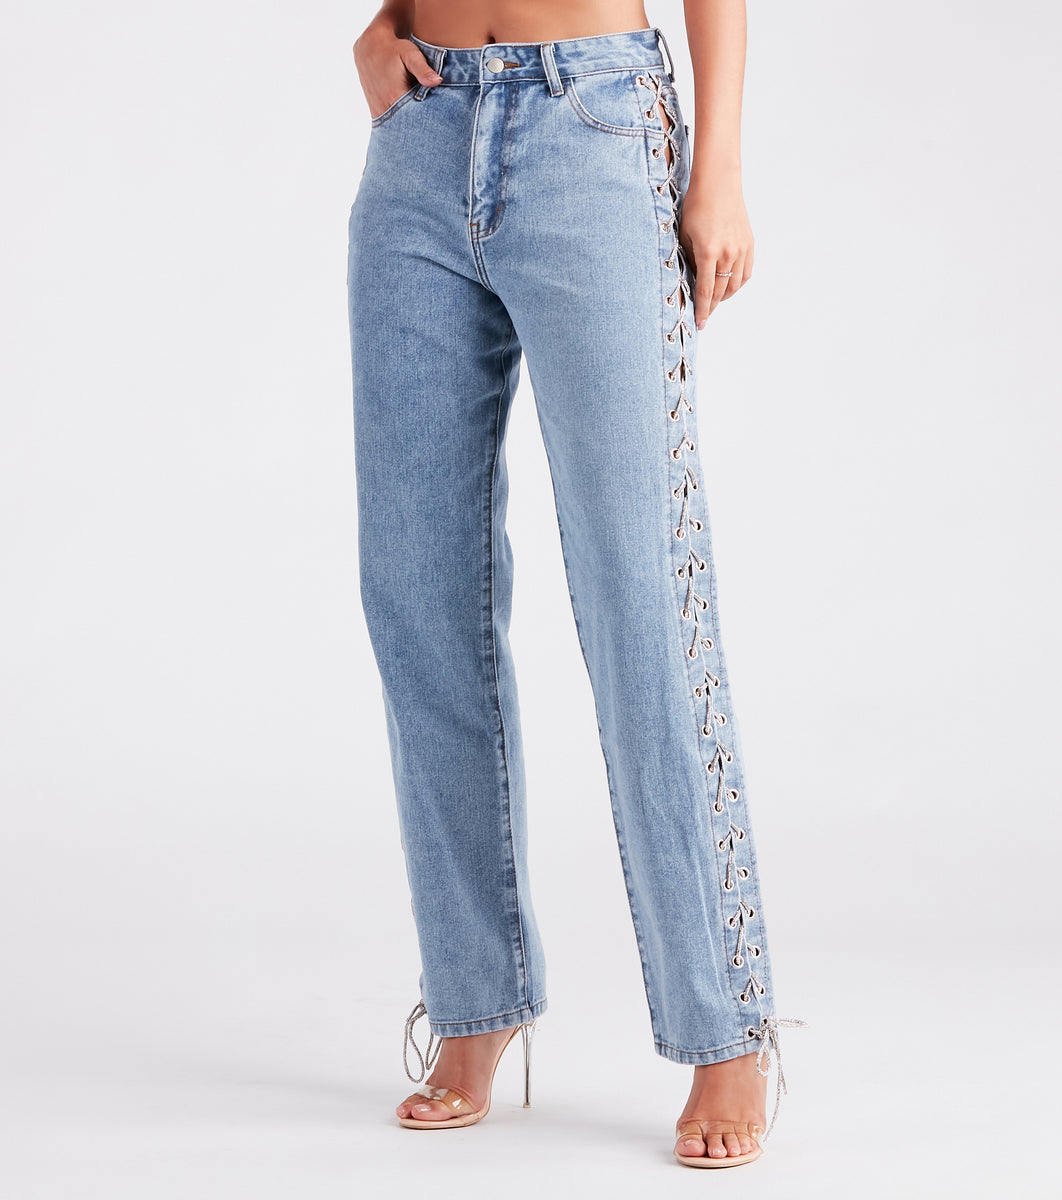 Chico's Girlfriend Coated Ankle Jeans